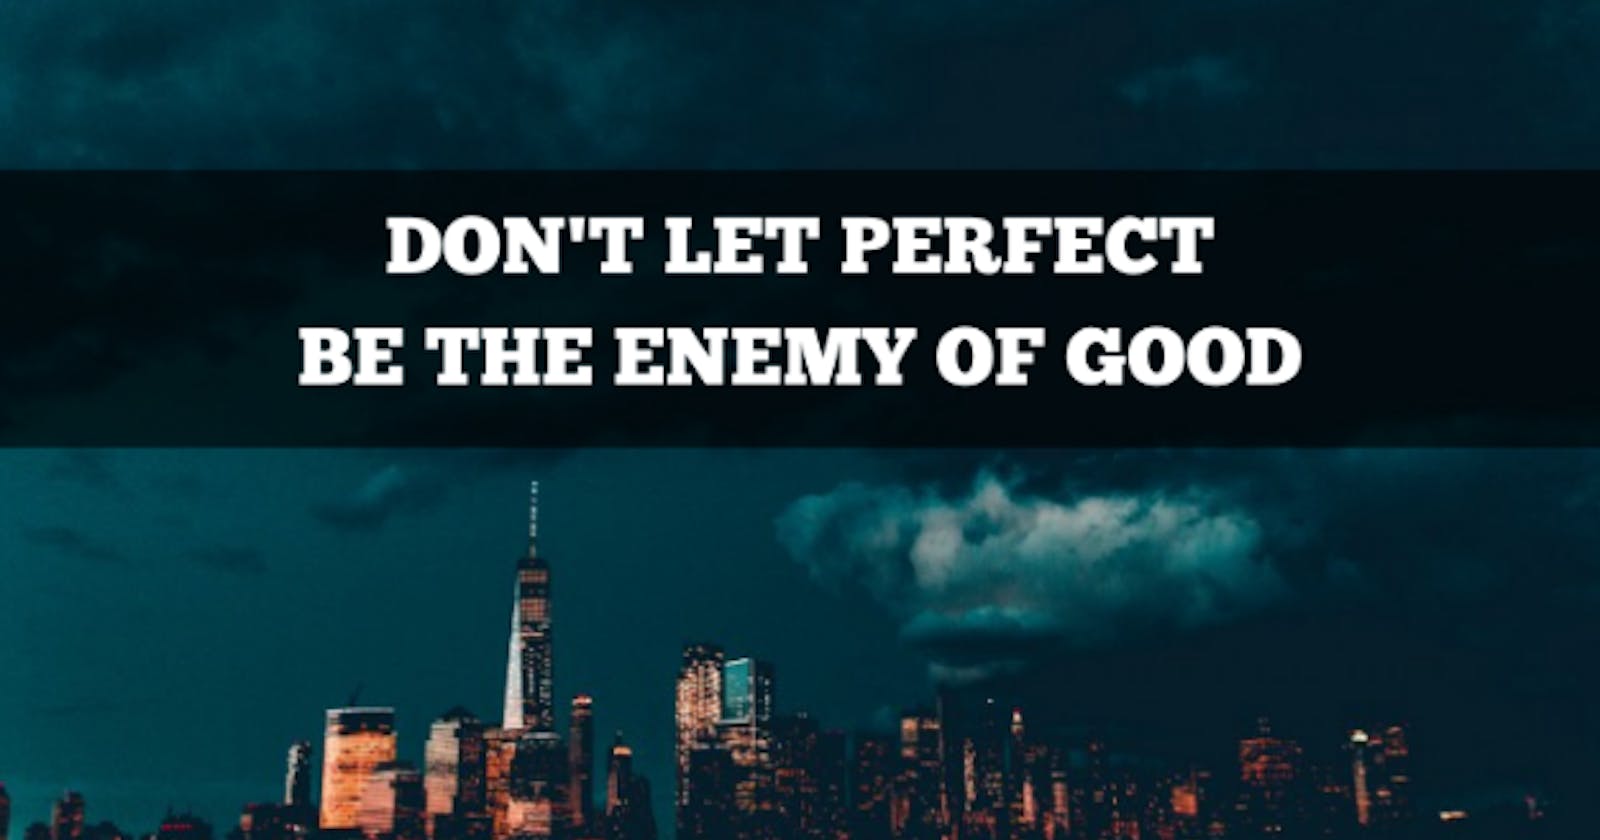 DON'T LET PERFECT BE THE ENEMY OF THE GOOD